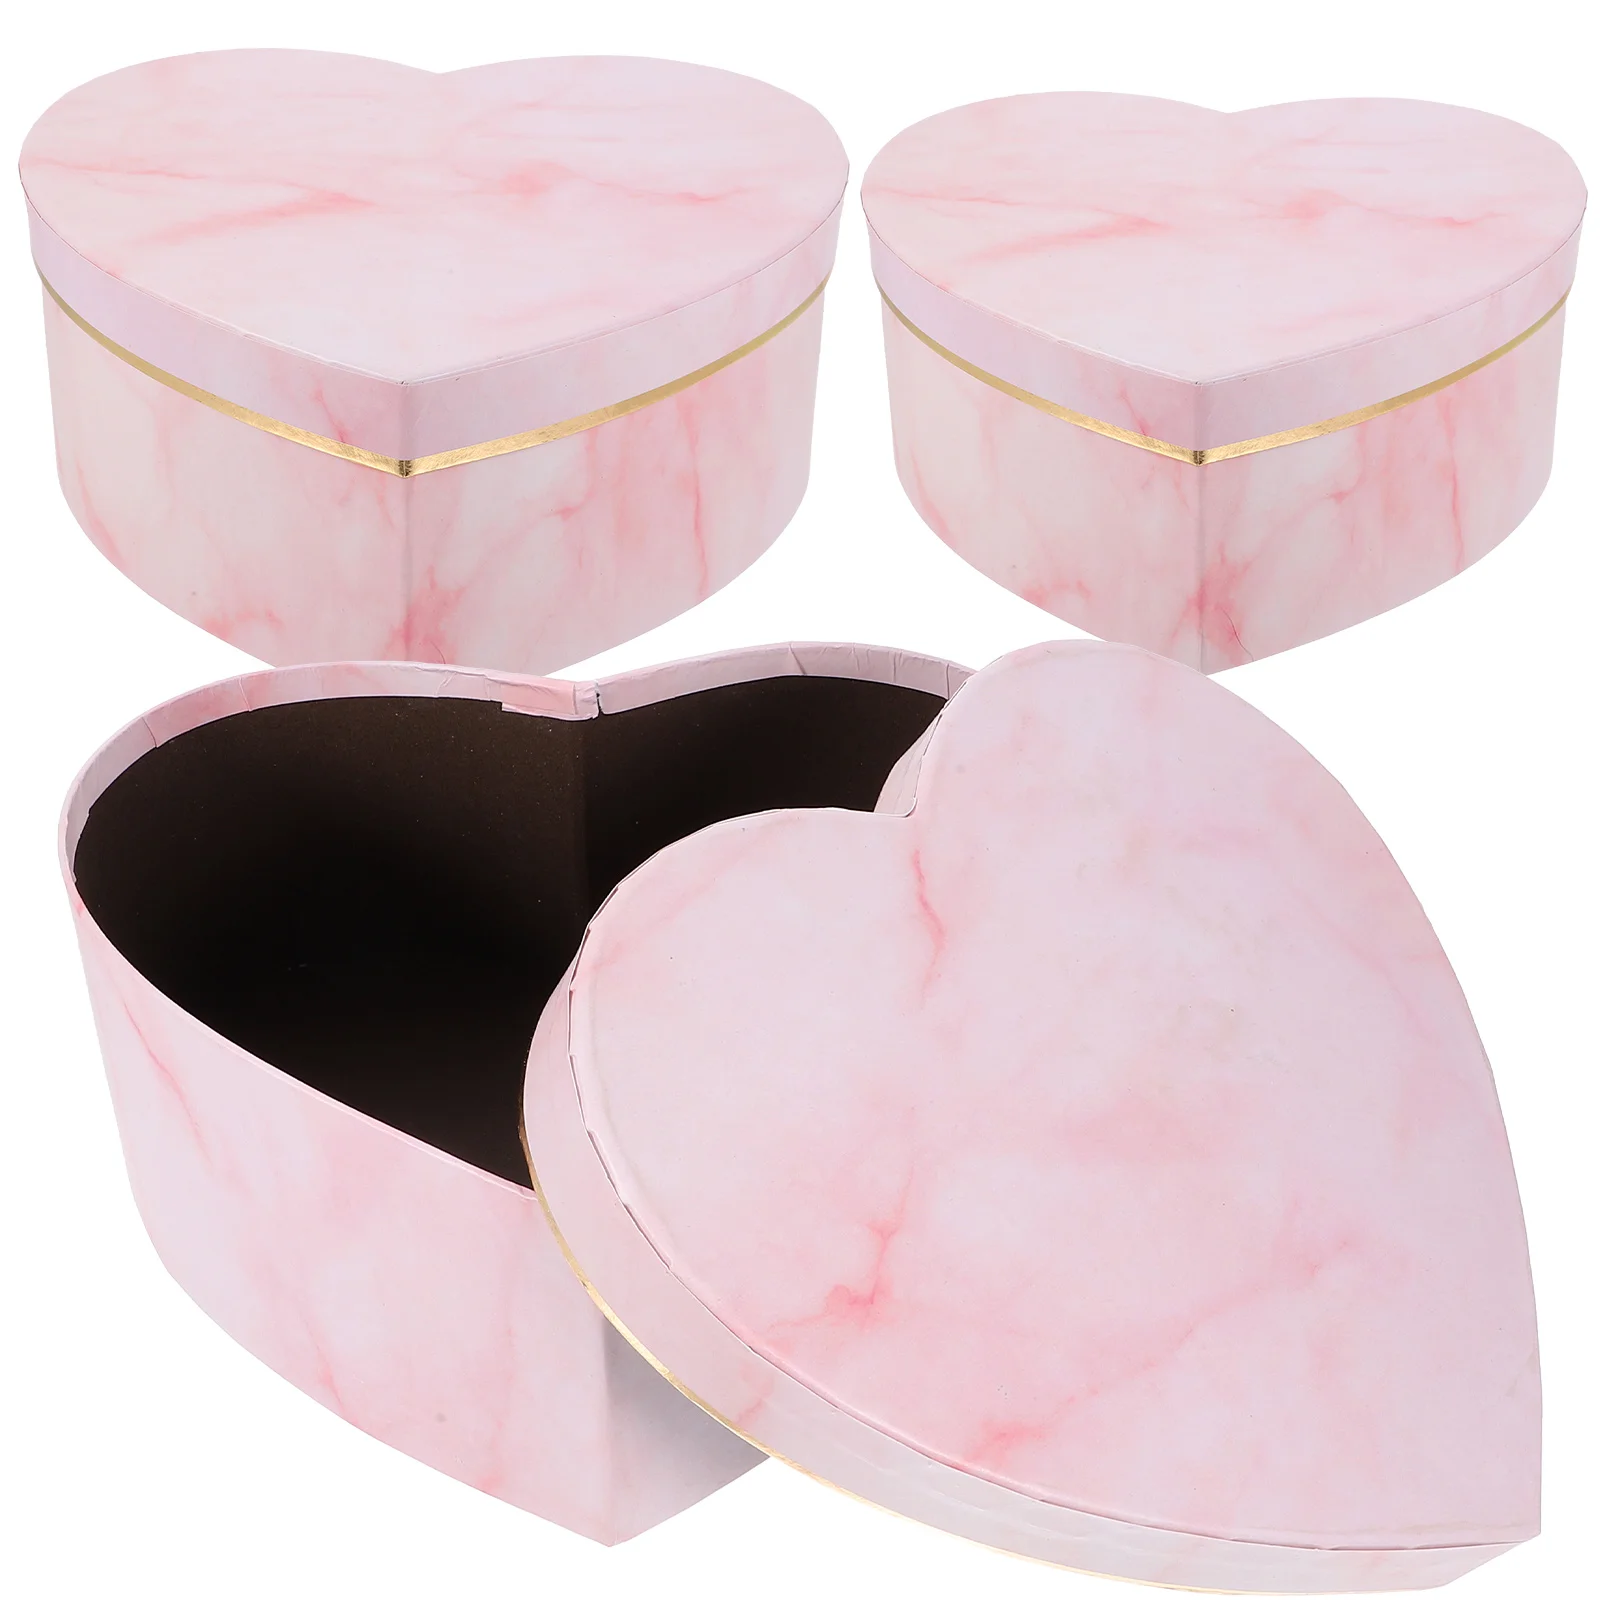 

3pcs Heart Shape Gift Boxes Wedding Gift Storage Boxes Paperboard Perfume Packaging Boxes